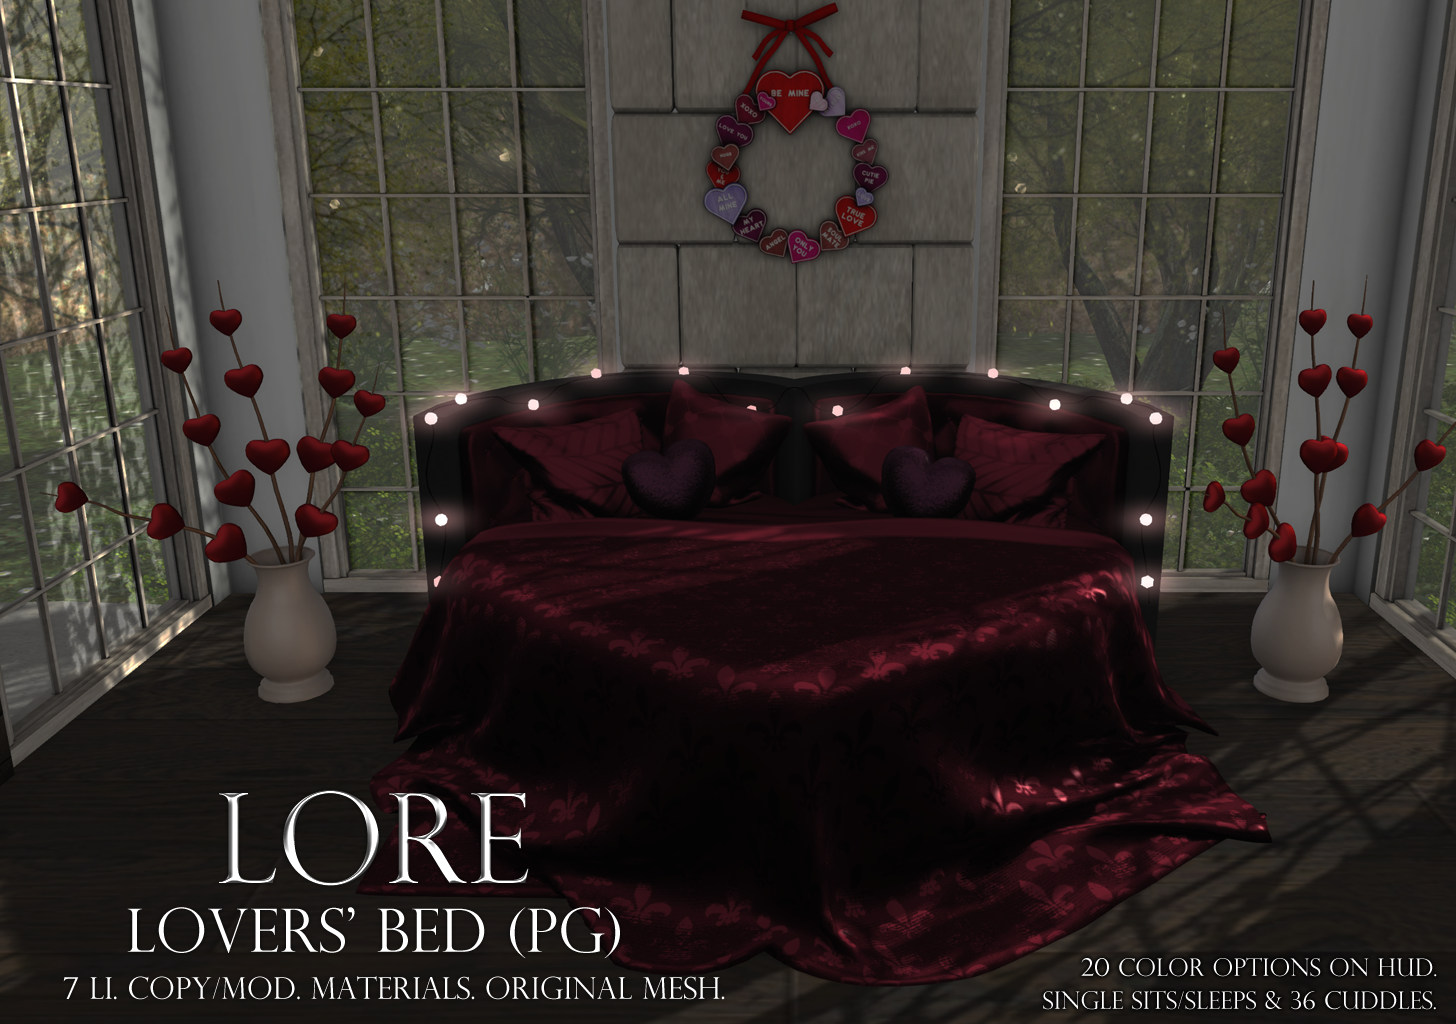 Lovers' bed PG ad